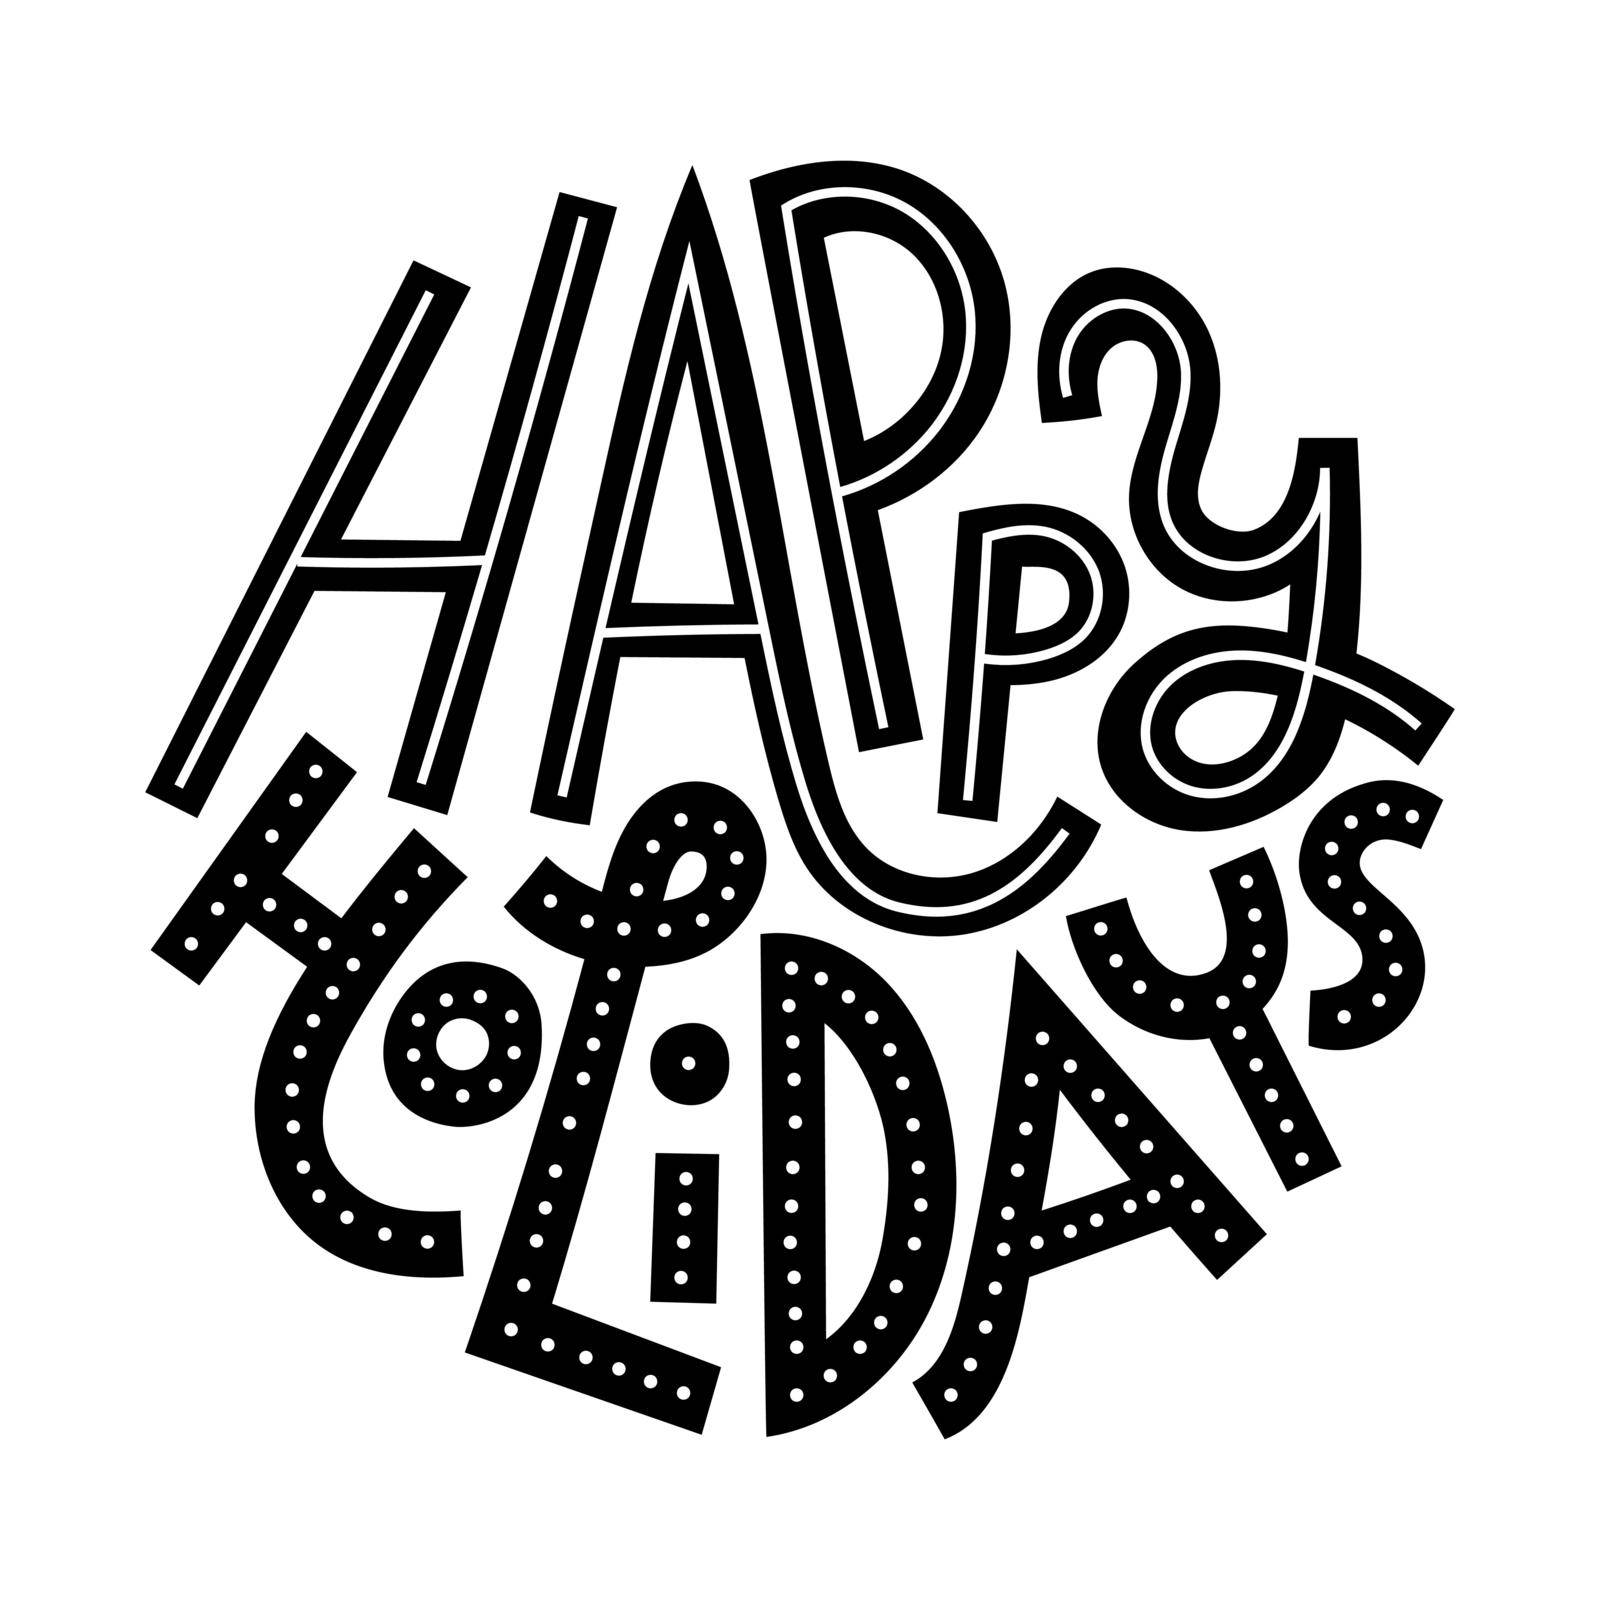 Happy holidays lettering art. Round-shaped single-color typographic composition. Use for plotter, screen printing, laser cutting, engraving, stamp. Inclusive greeting text.